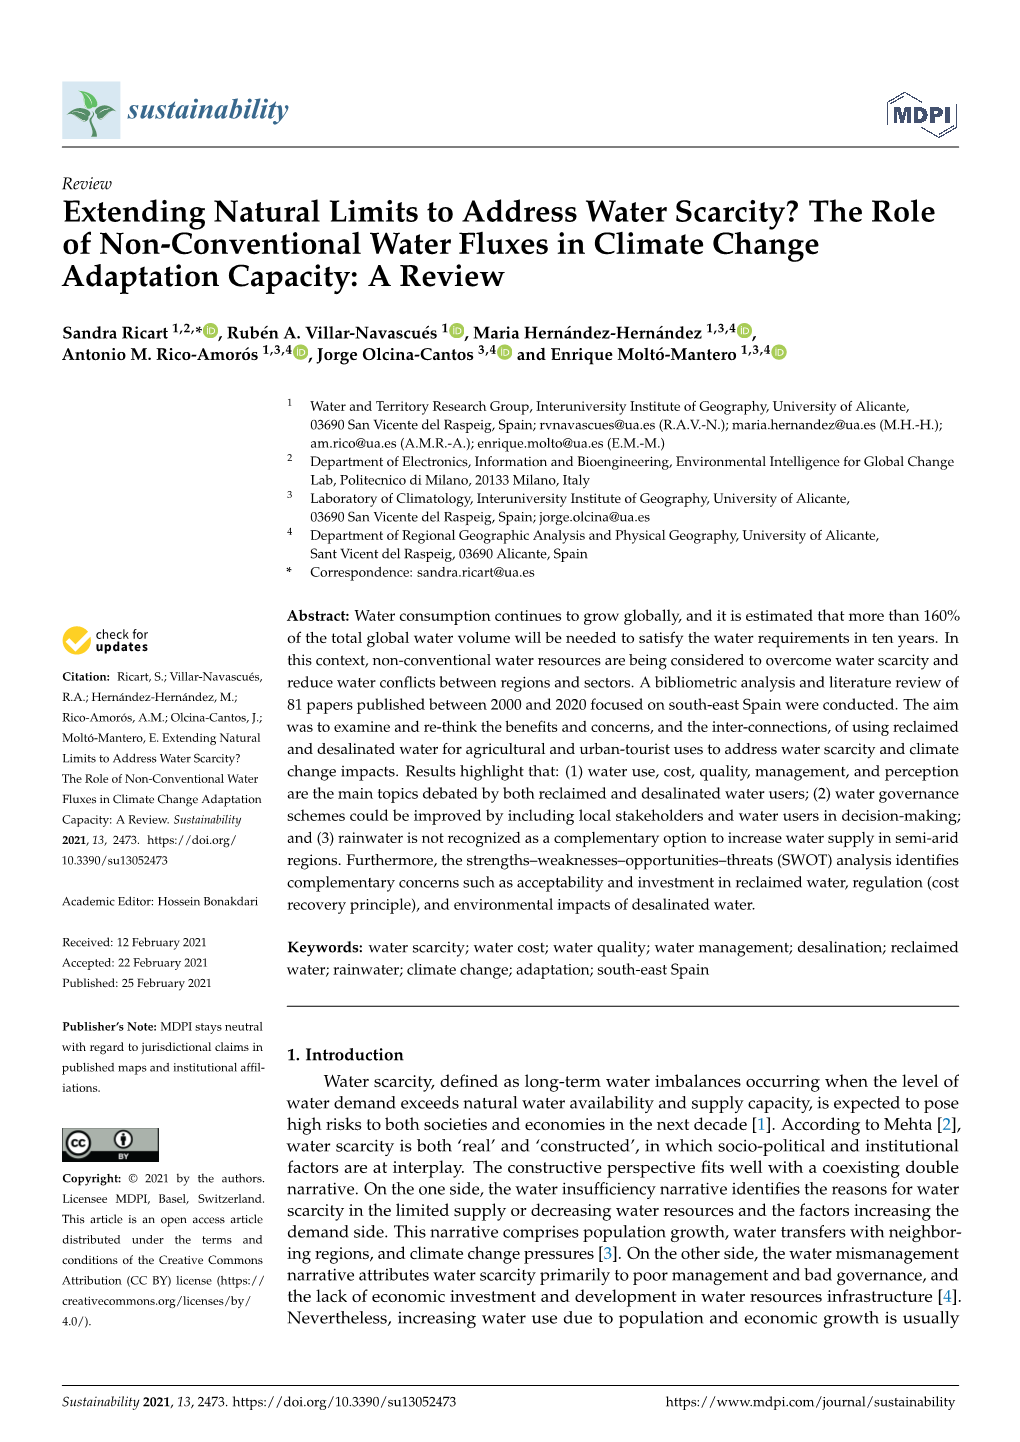 Extending Natural Limits to Address Water Scarcity? the Role of Non-Conventional Water Fluxes in Climate Change Adaptation Capacity: a Review